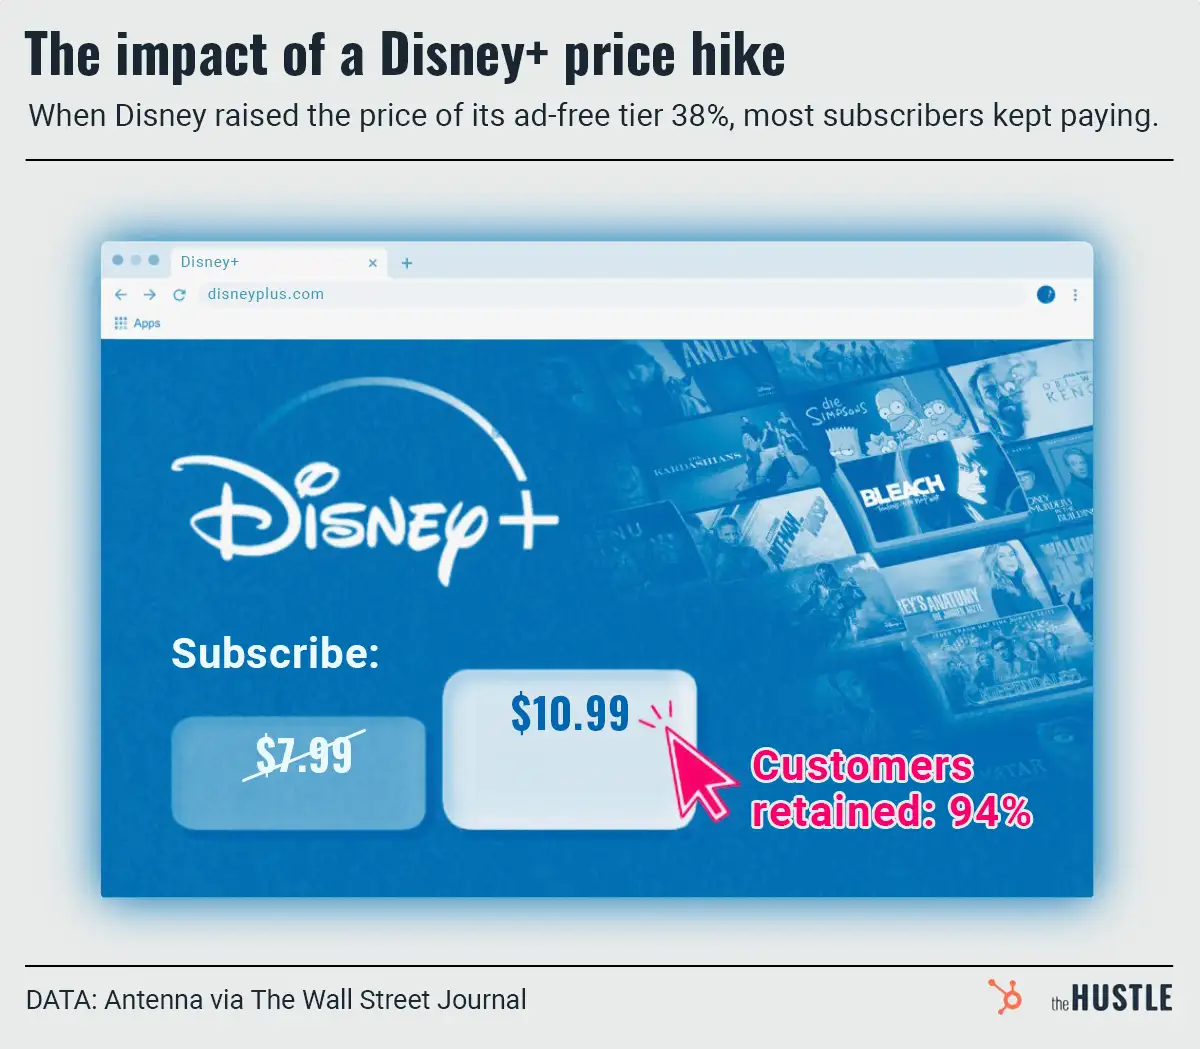 Price increase? Disney fans are nonplussed